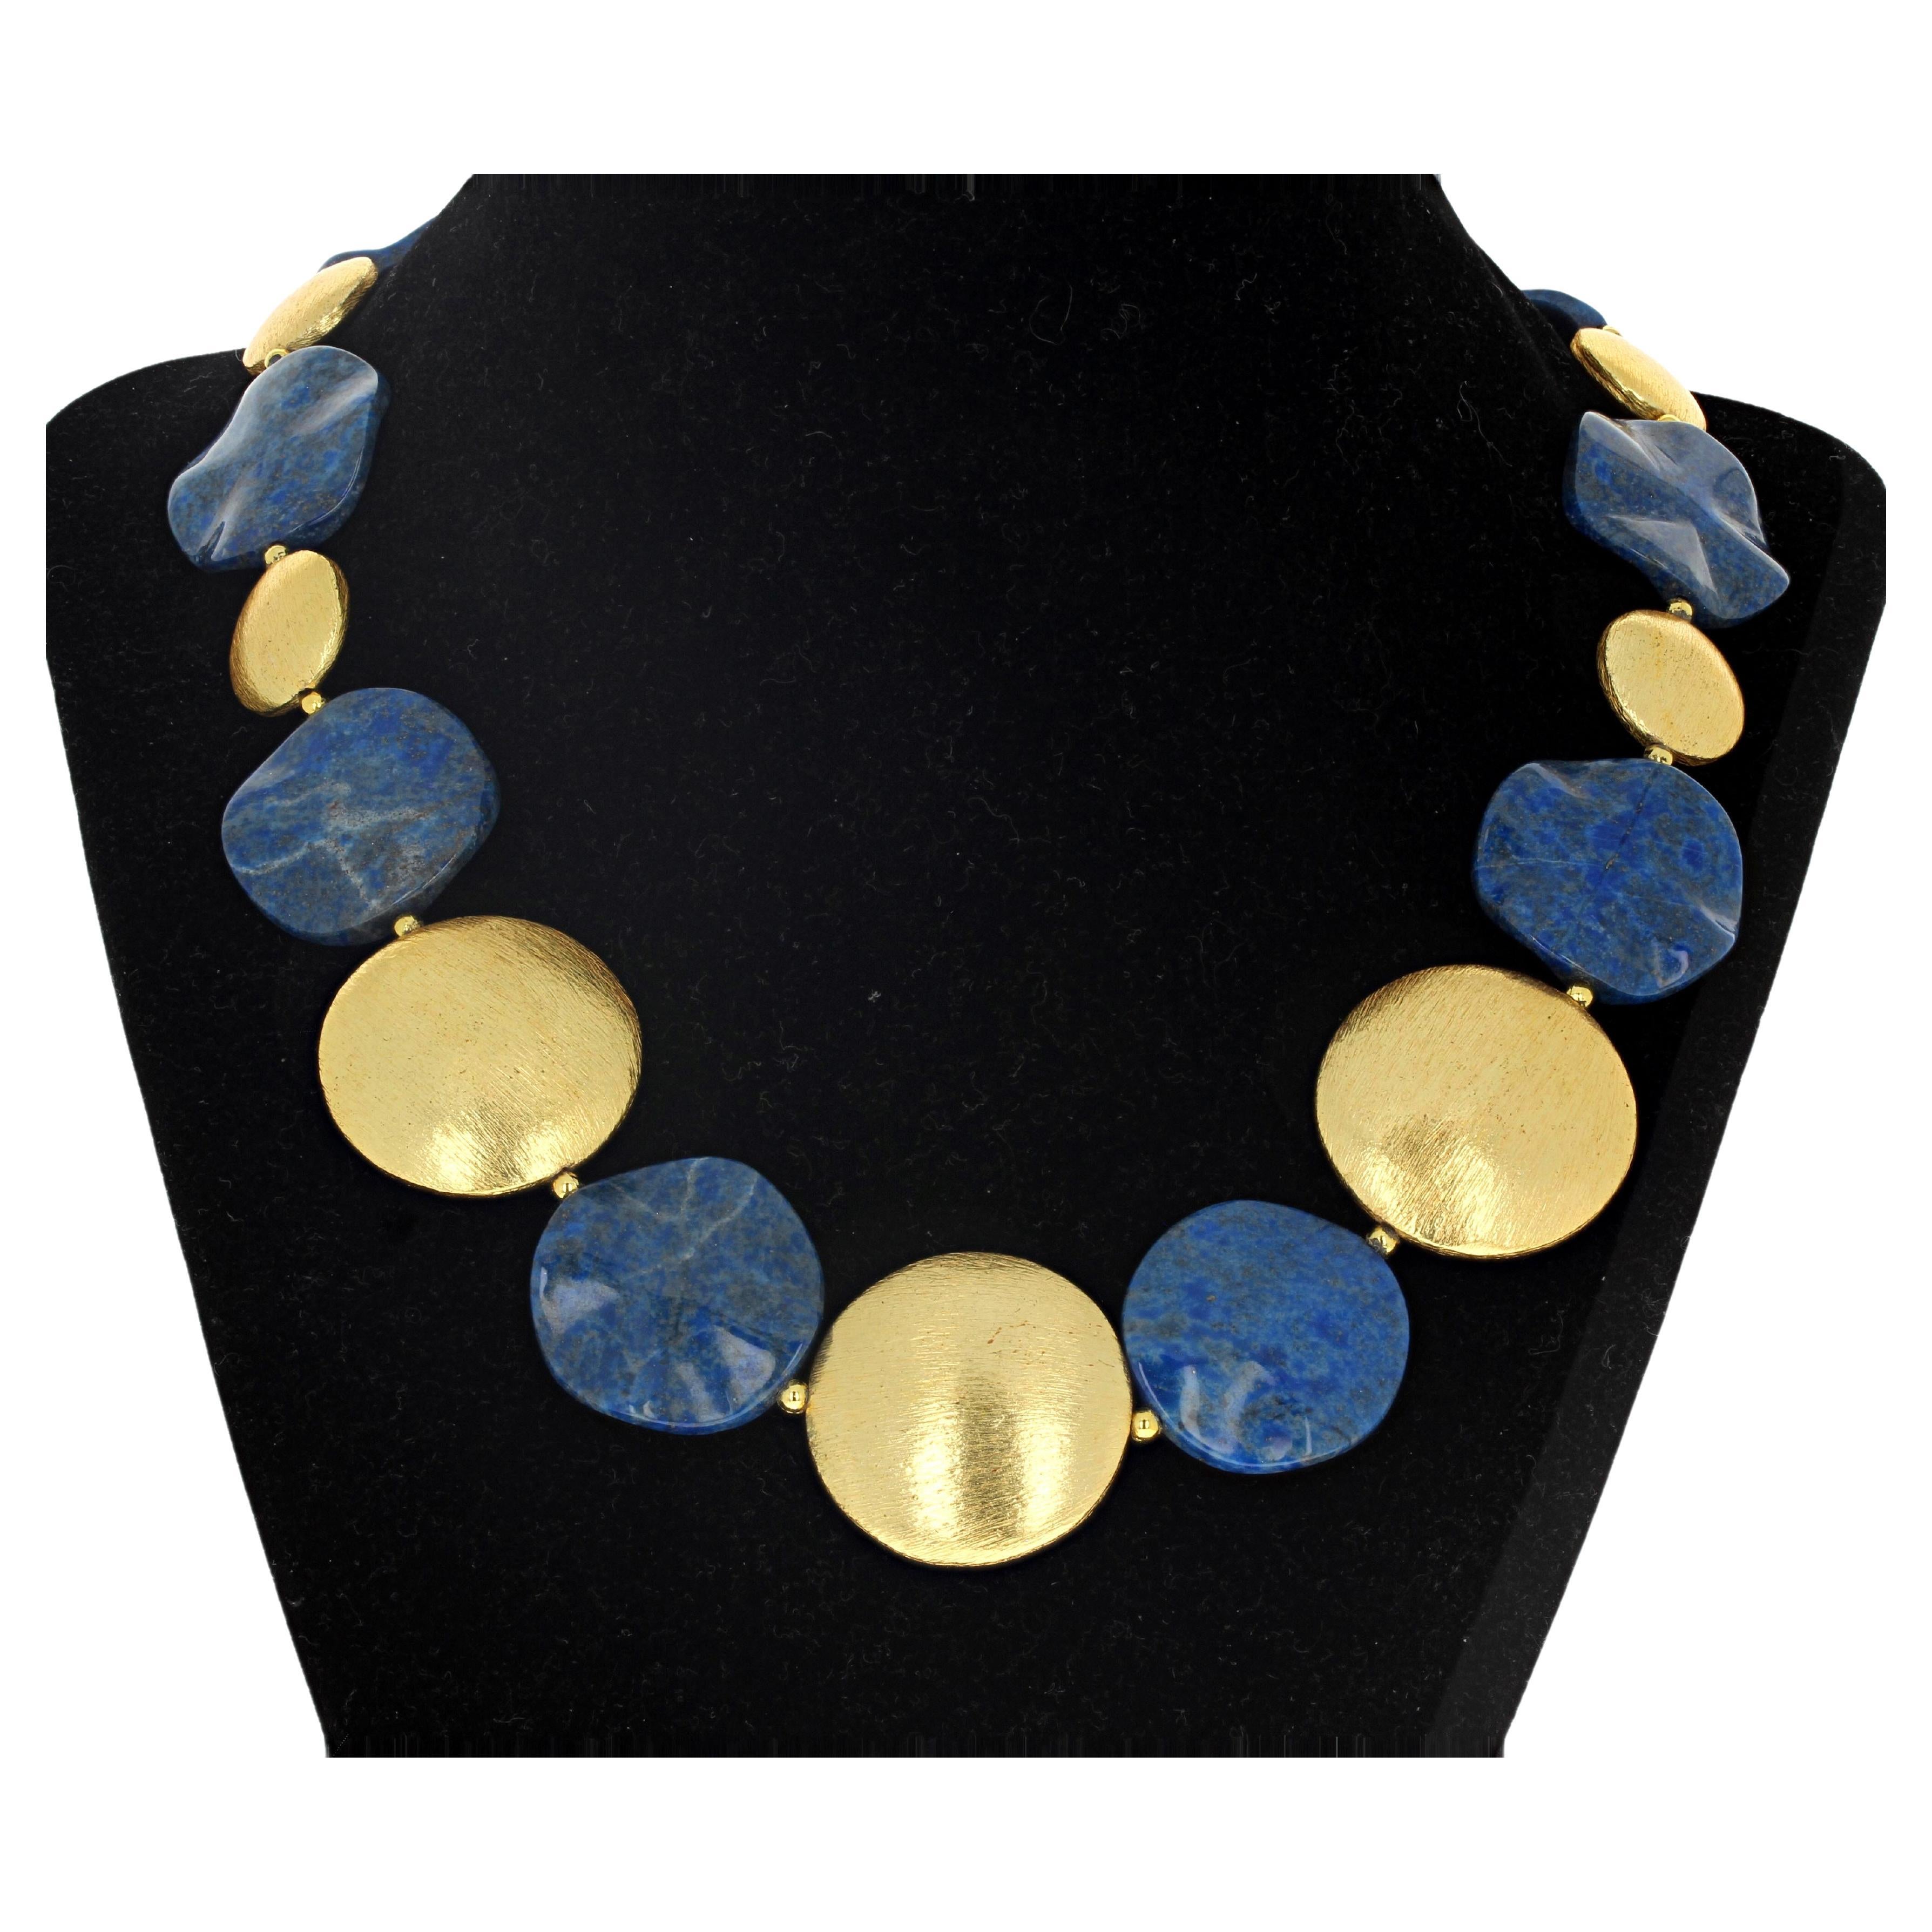 AJD Goldy Flickering Natural Lapis Lazuli & Large Goldy Rondels Necklace